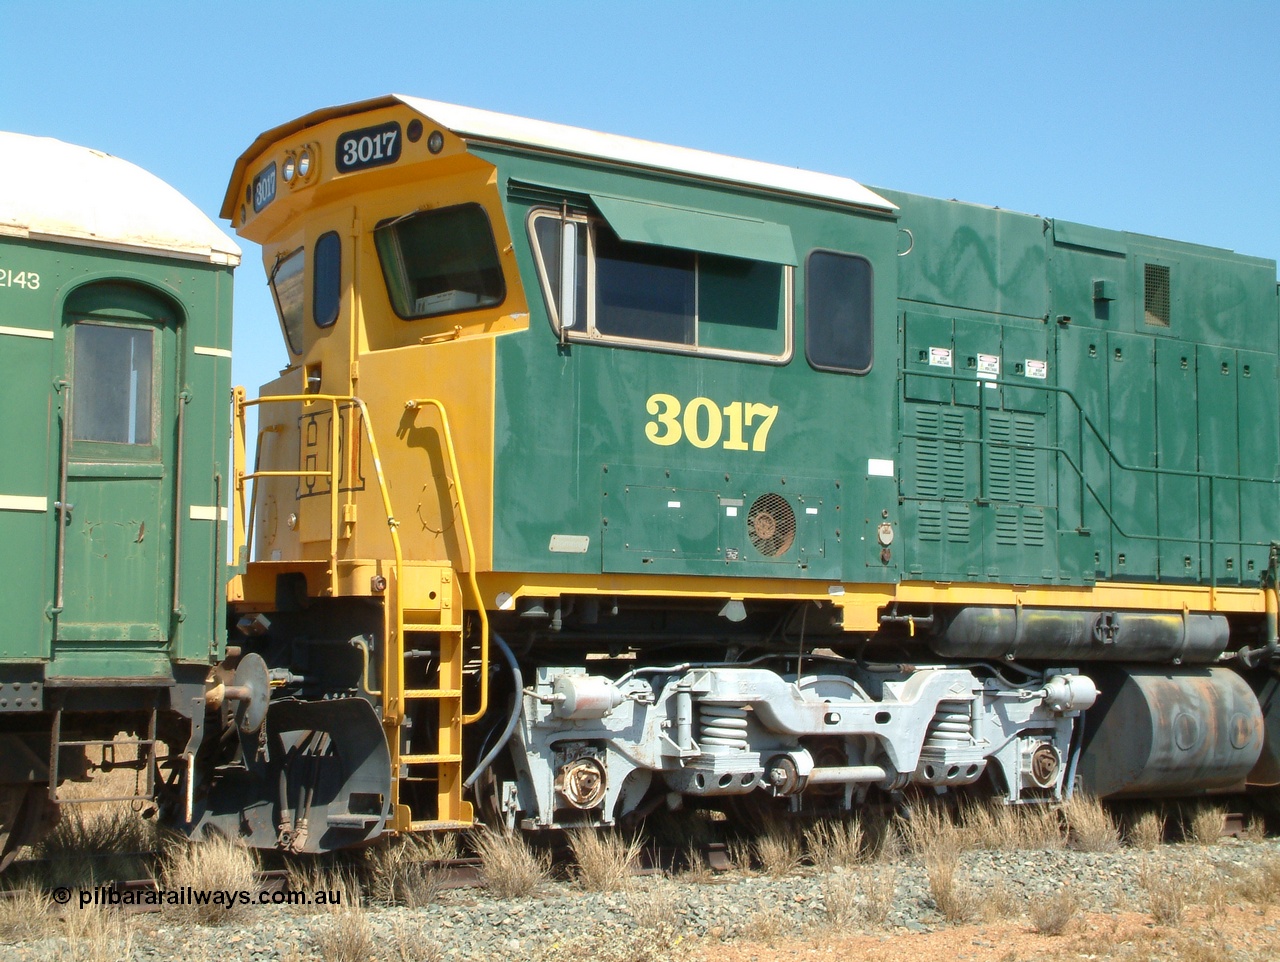 041014 142144
Pilbara Railways Historical Society, Comeng WA ALCo rebuild C636R locomotive 3017 serial WA-135-C-6043-04. The improved Pilbara cab was fitted as part of the rebuild in April 1985. Donated to Society in 1996. 14th October 2004.
Keywords: 3017;Comeng-WA;ALCo;C636R;WA-135-C-6043-04;rebuild;